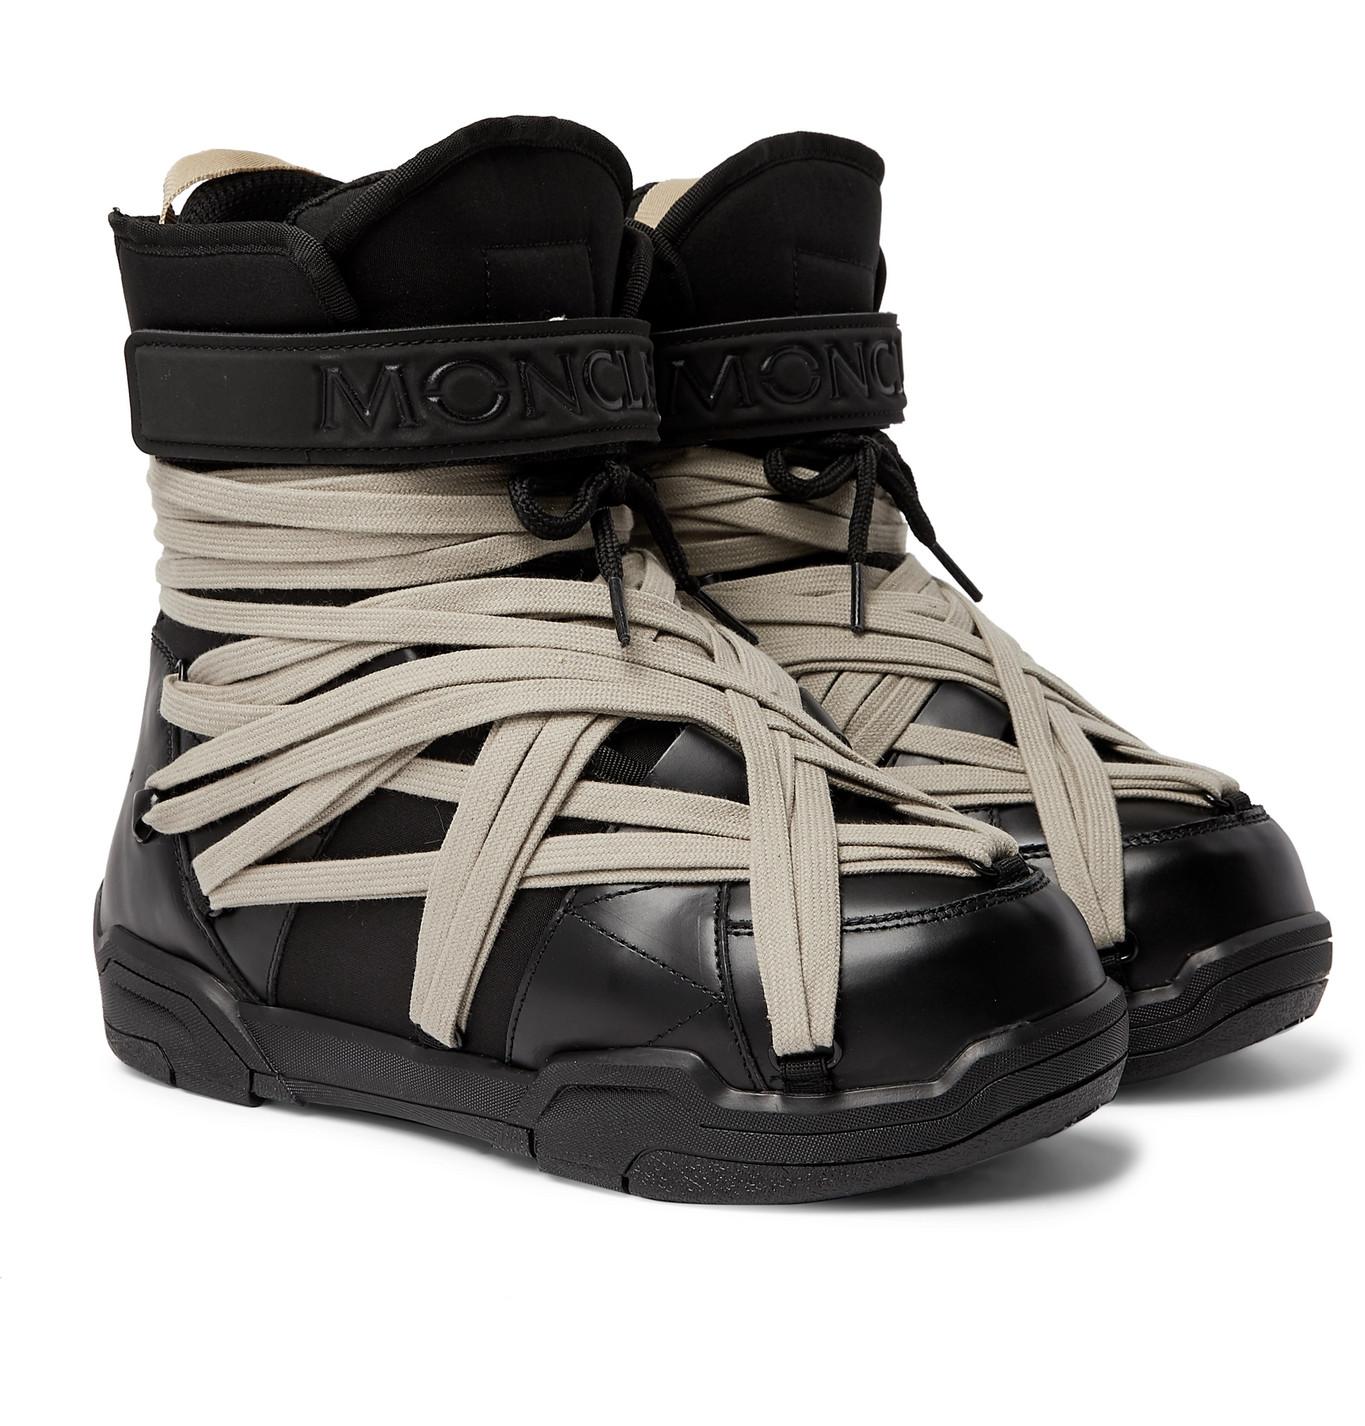 Rick Owens Moncler Amber Canvas-trimmed Leather Snow Boots in Black for